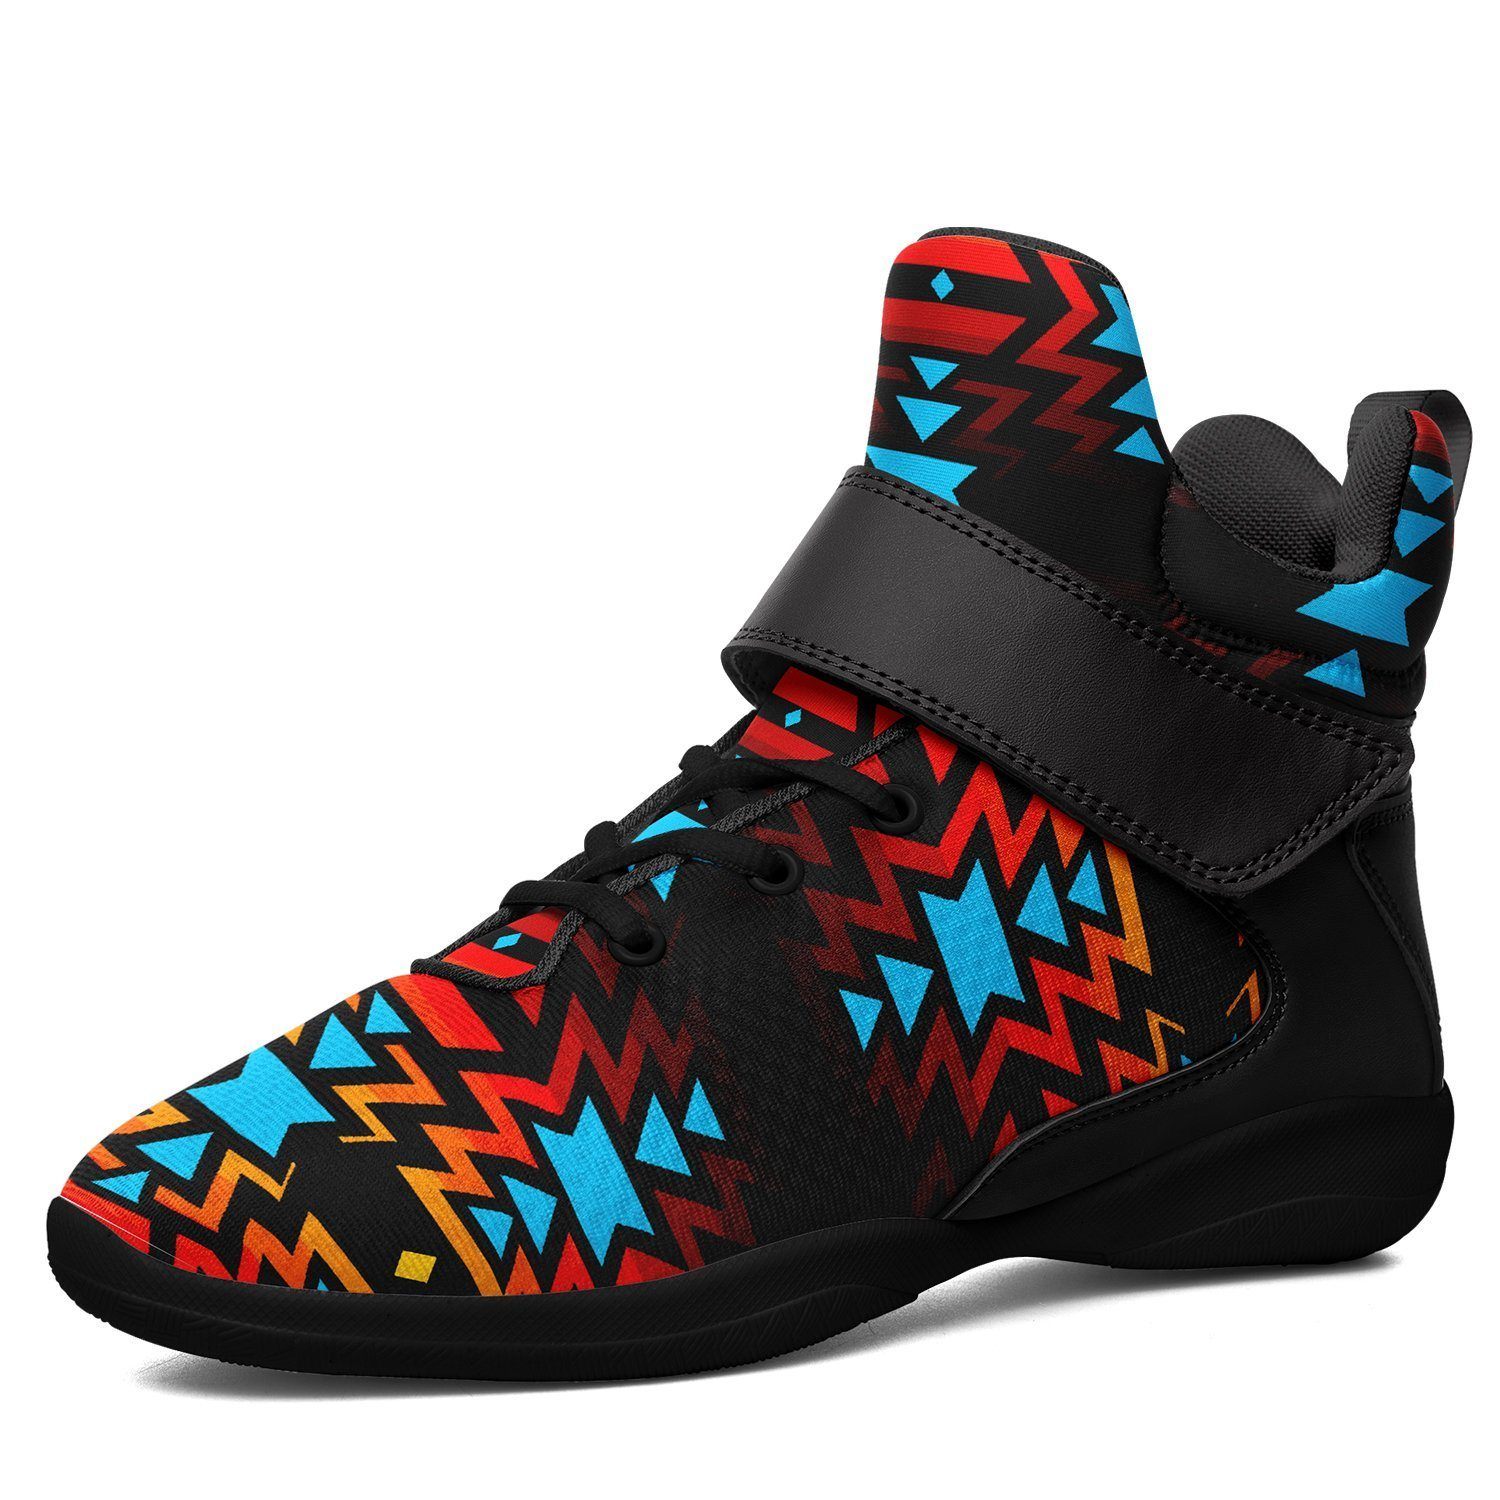 Black Fire and Turquoise Ipottaa Basketball / Sport High Top Shoes - Black Sole 49 Dzine US Men 7 / EUR 40 Black Sole with Black Strap 